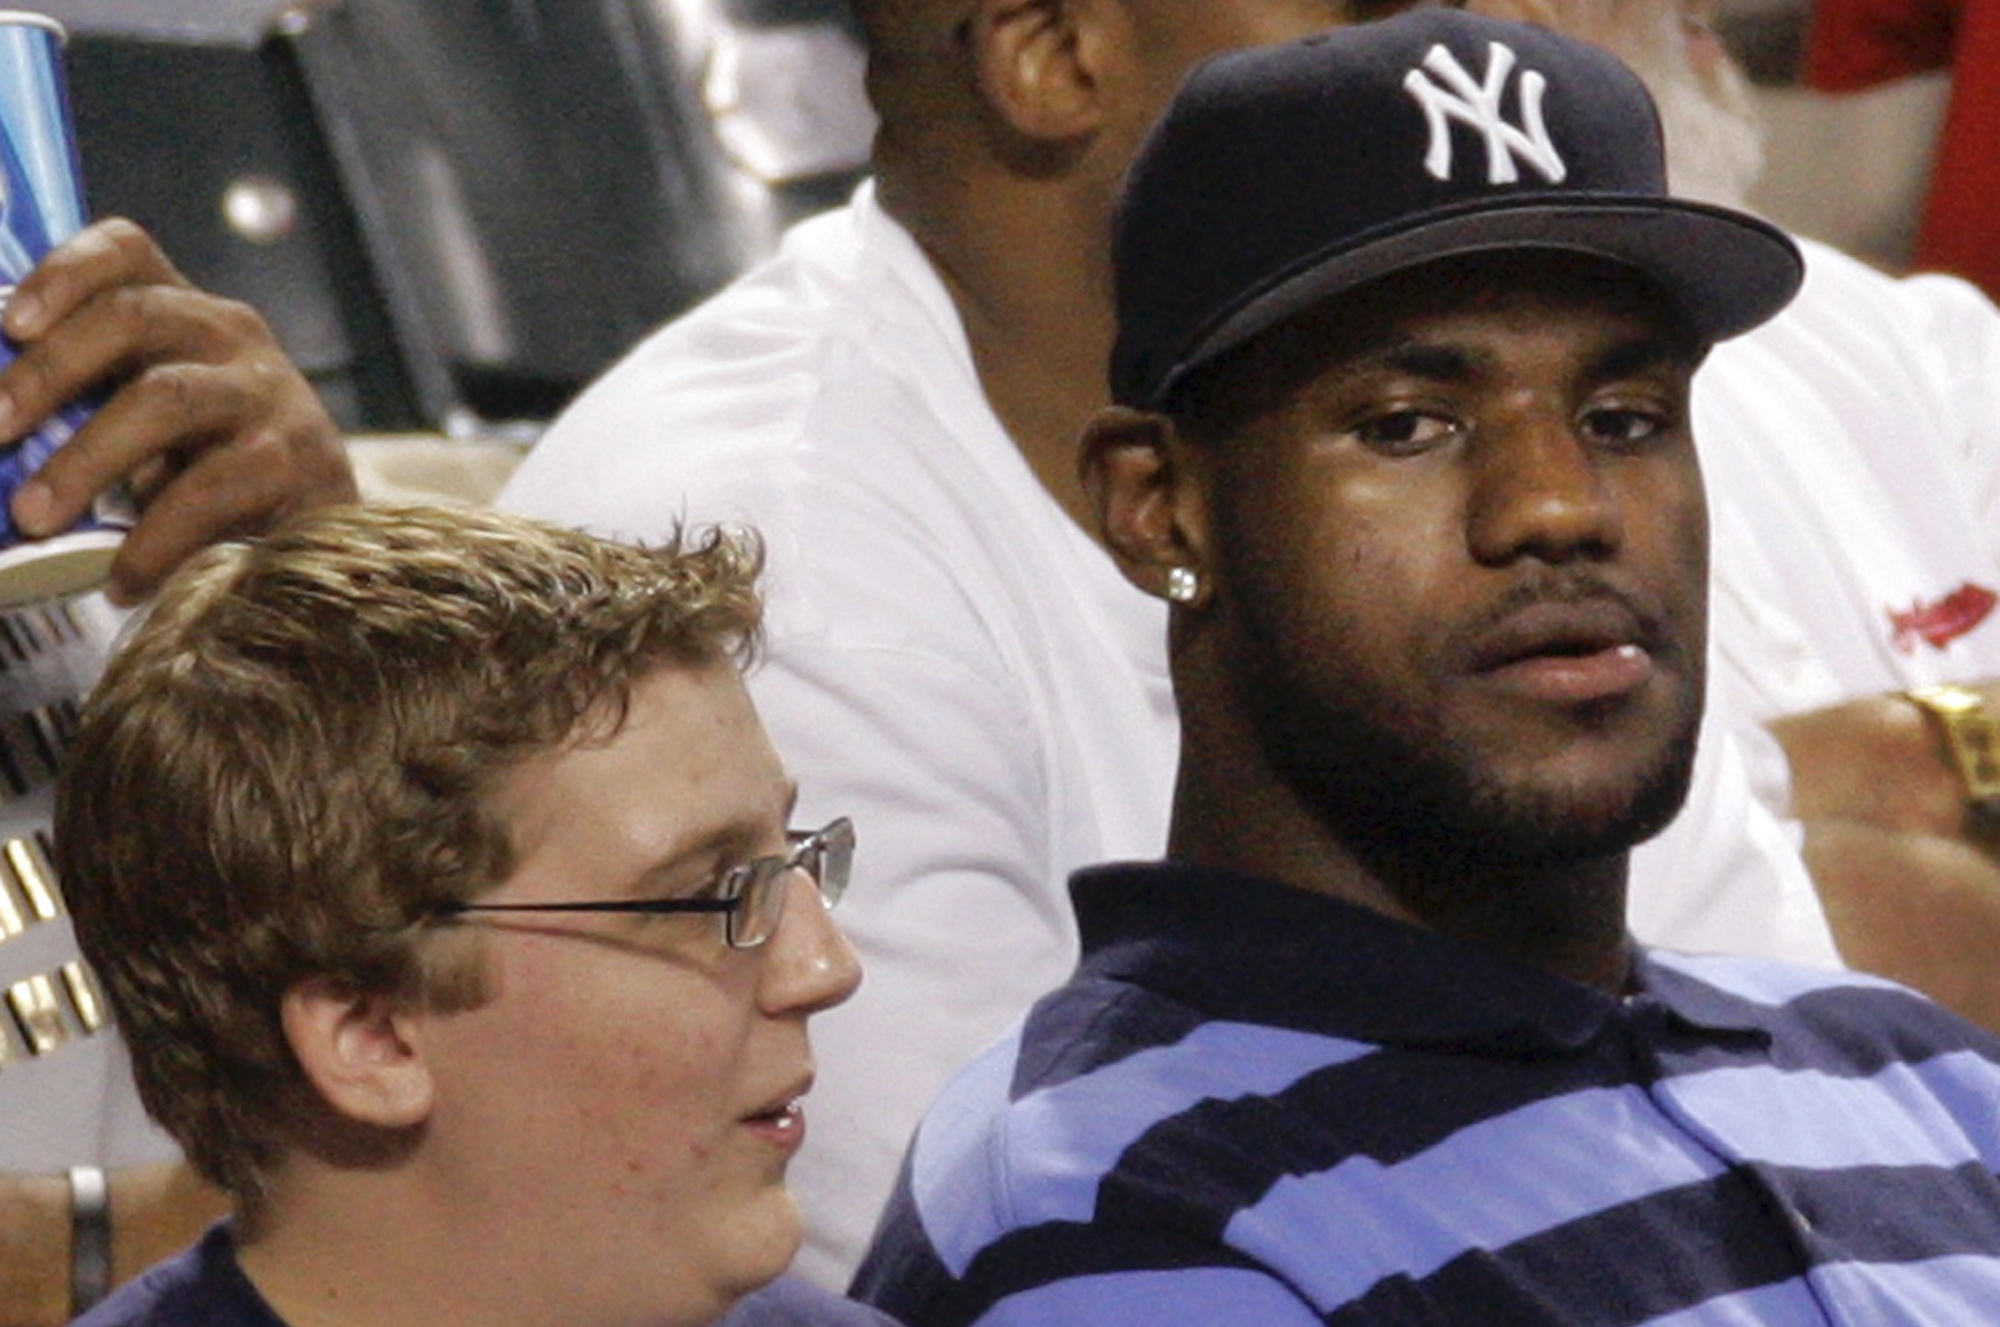 LeBron James Sports Red Sox Hat After Lakers Loss